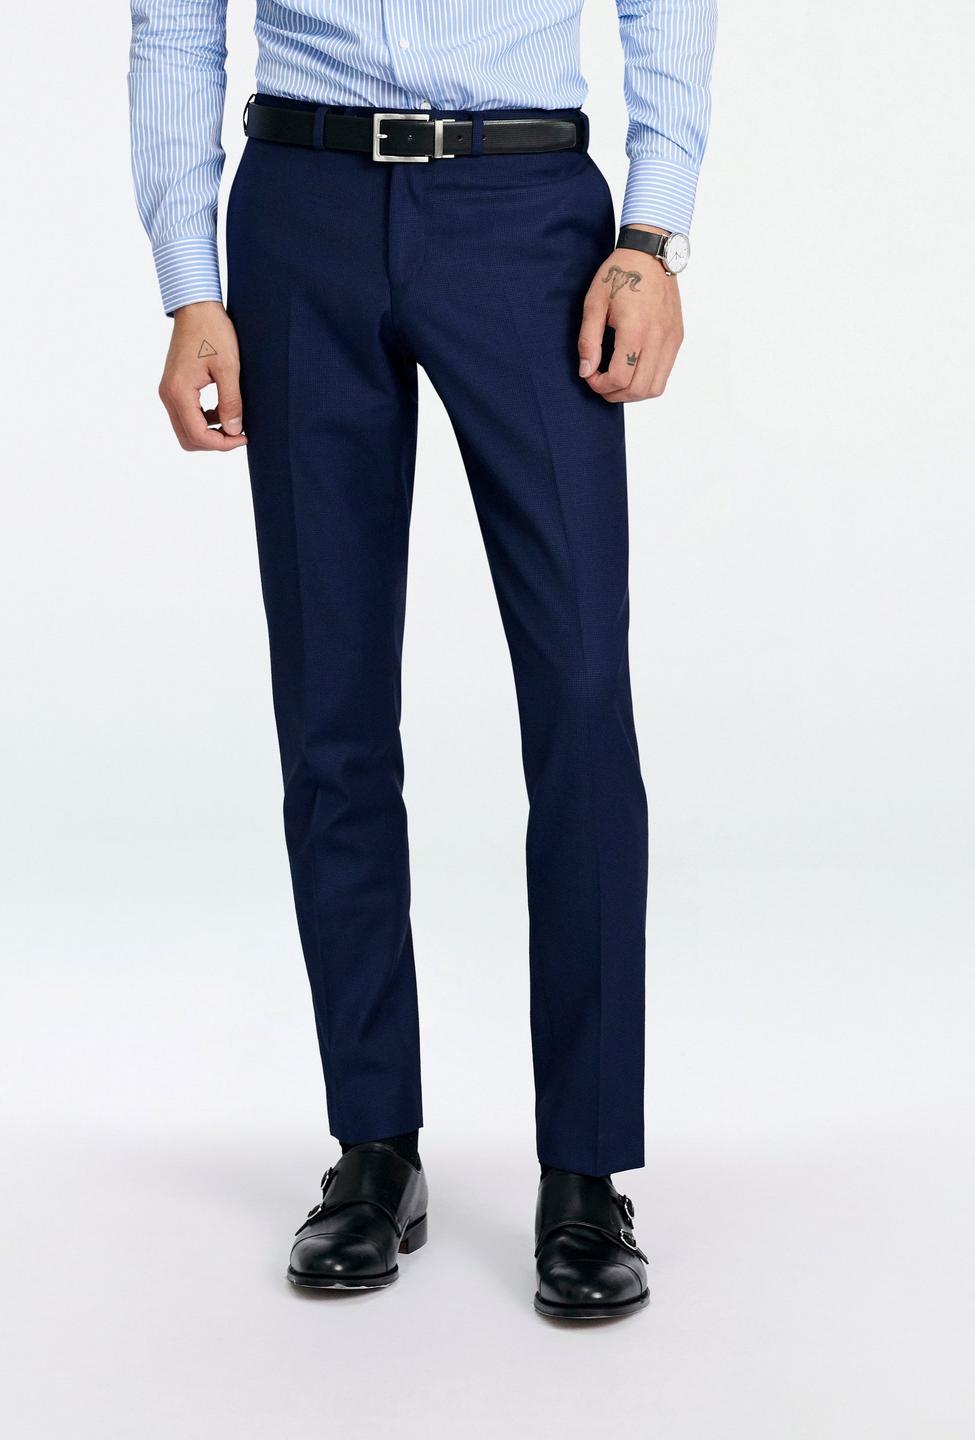 Blue pants - Malvern Houndstooth Design from Seasonal Indochino Collection